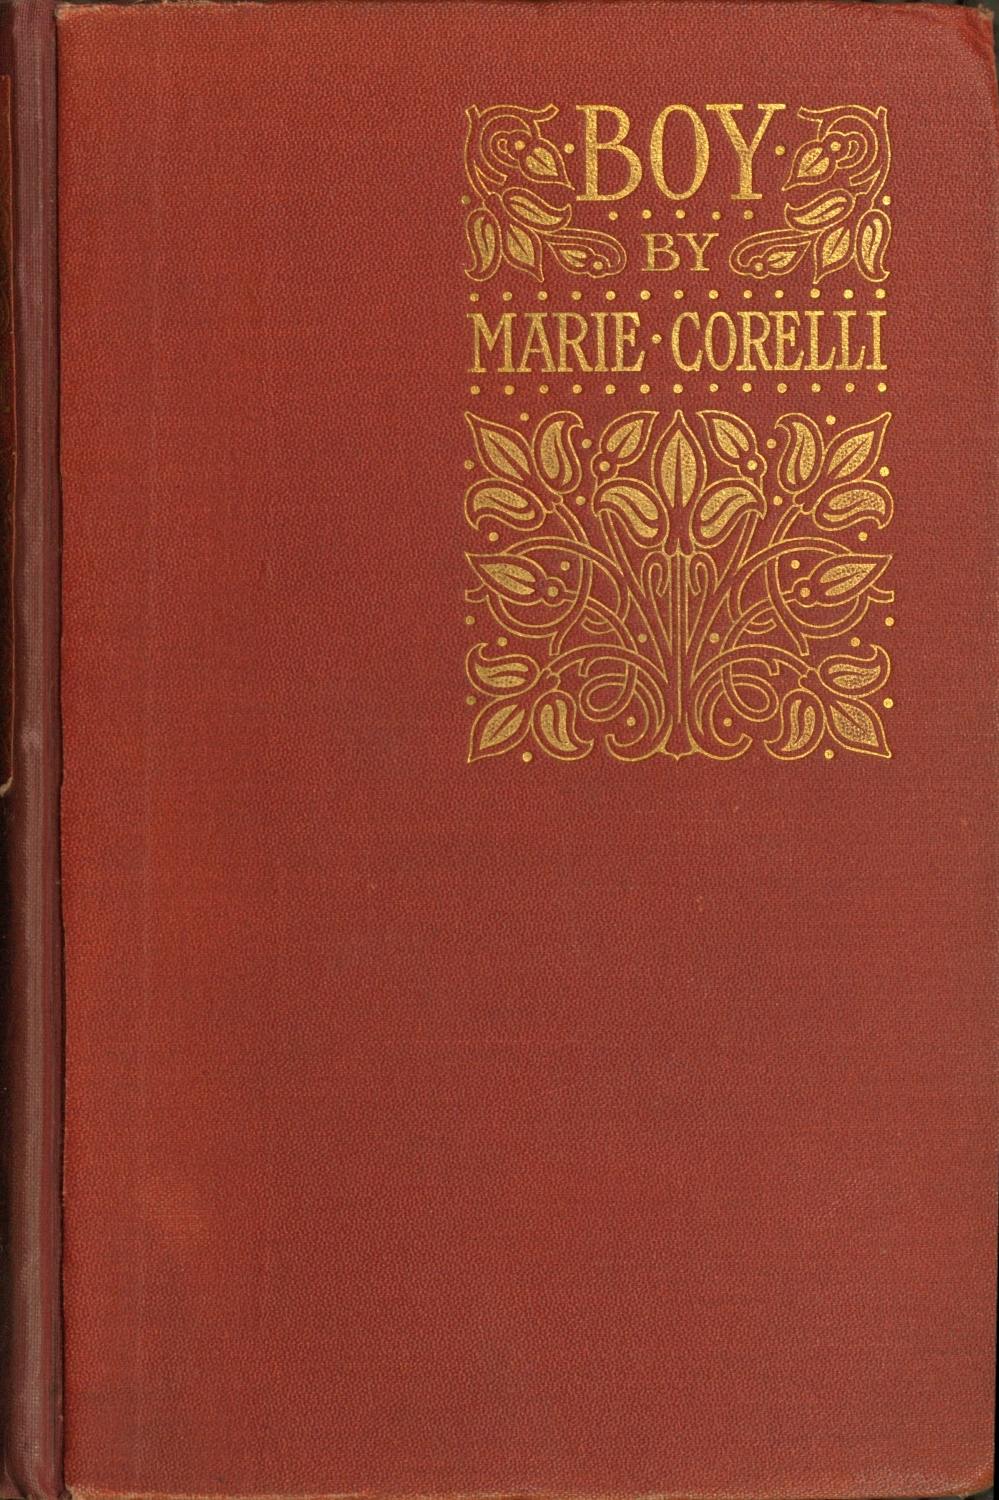 The Project Gutenberg eBook of Boy, by Marie Corelli. image